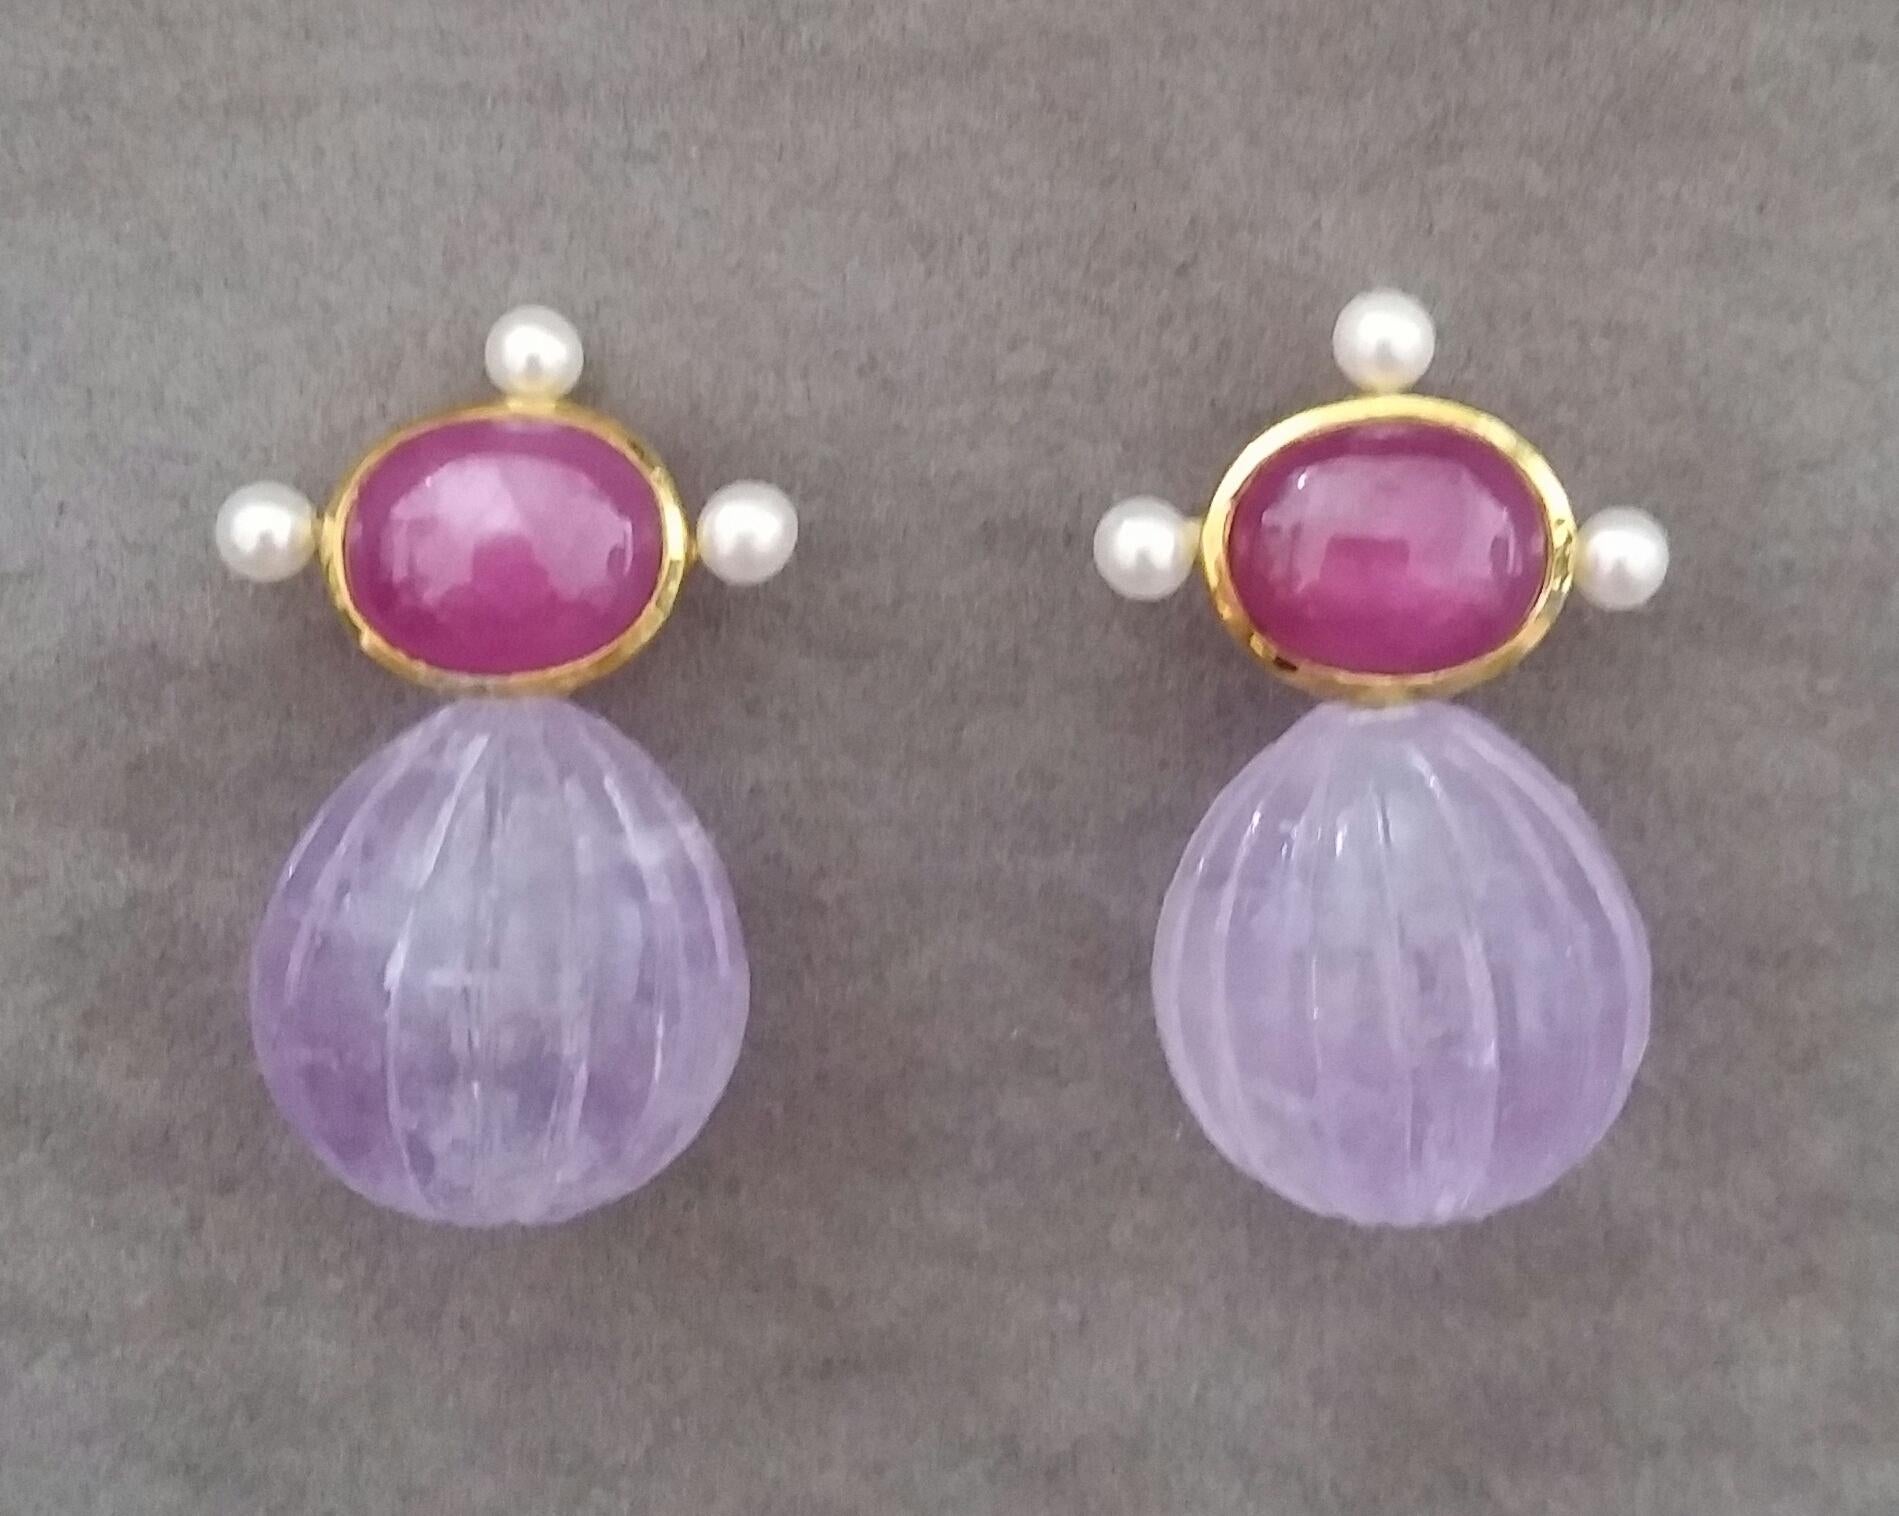 These elegant and handmade earrings have 2 Oval  Natural Ruby cabs measuring 8 x 10 mm set in a 14 Kt yellow gold bezel with 3 small round pearls of 3 mm on 3 sides at the top to which are suspended 2 Amethyst Engraved Round Drops measuring 15x